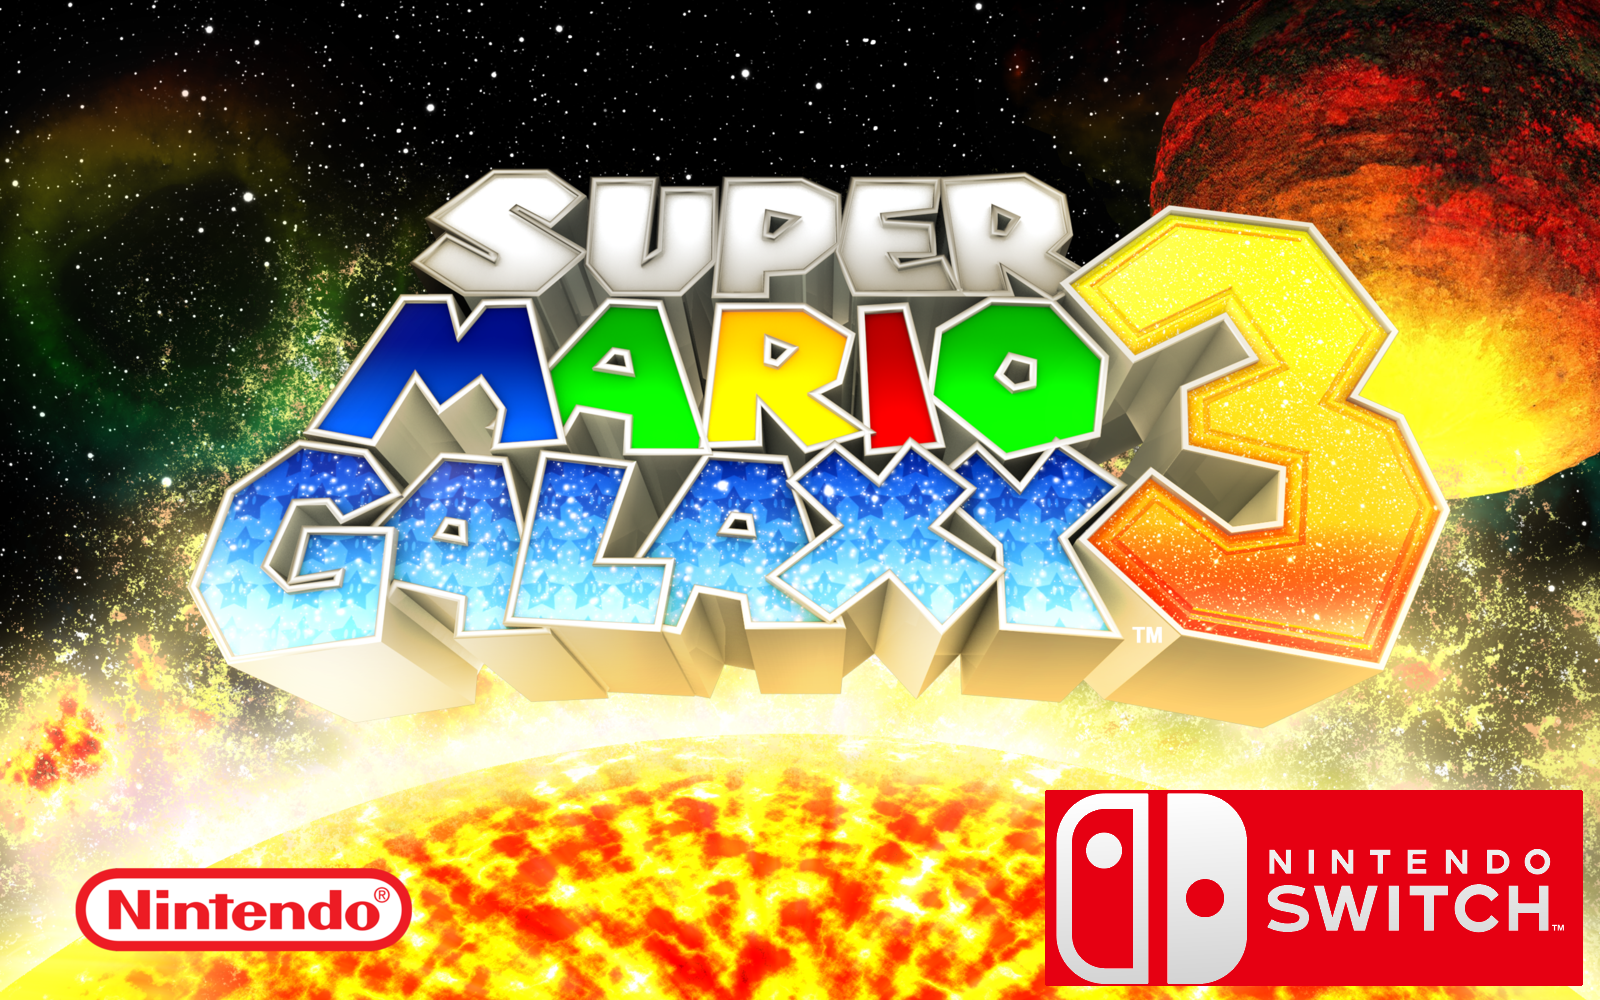 will mario galaxy 2 come to switch